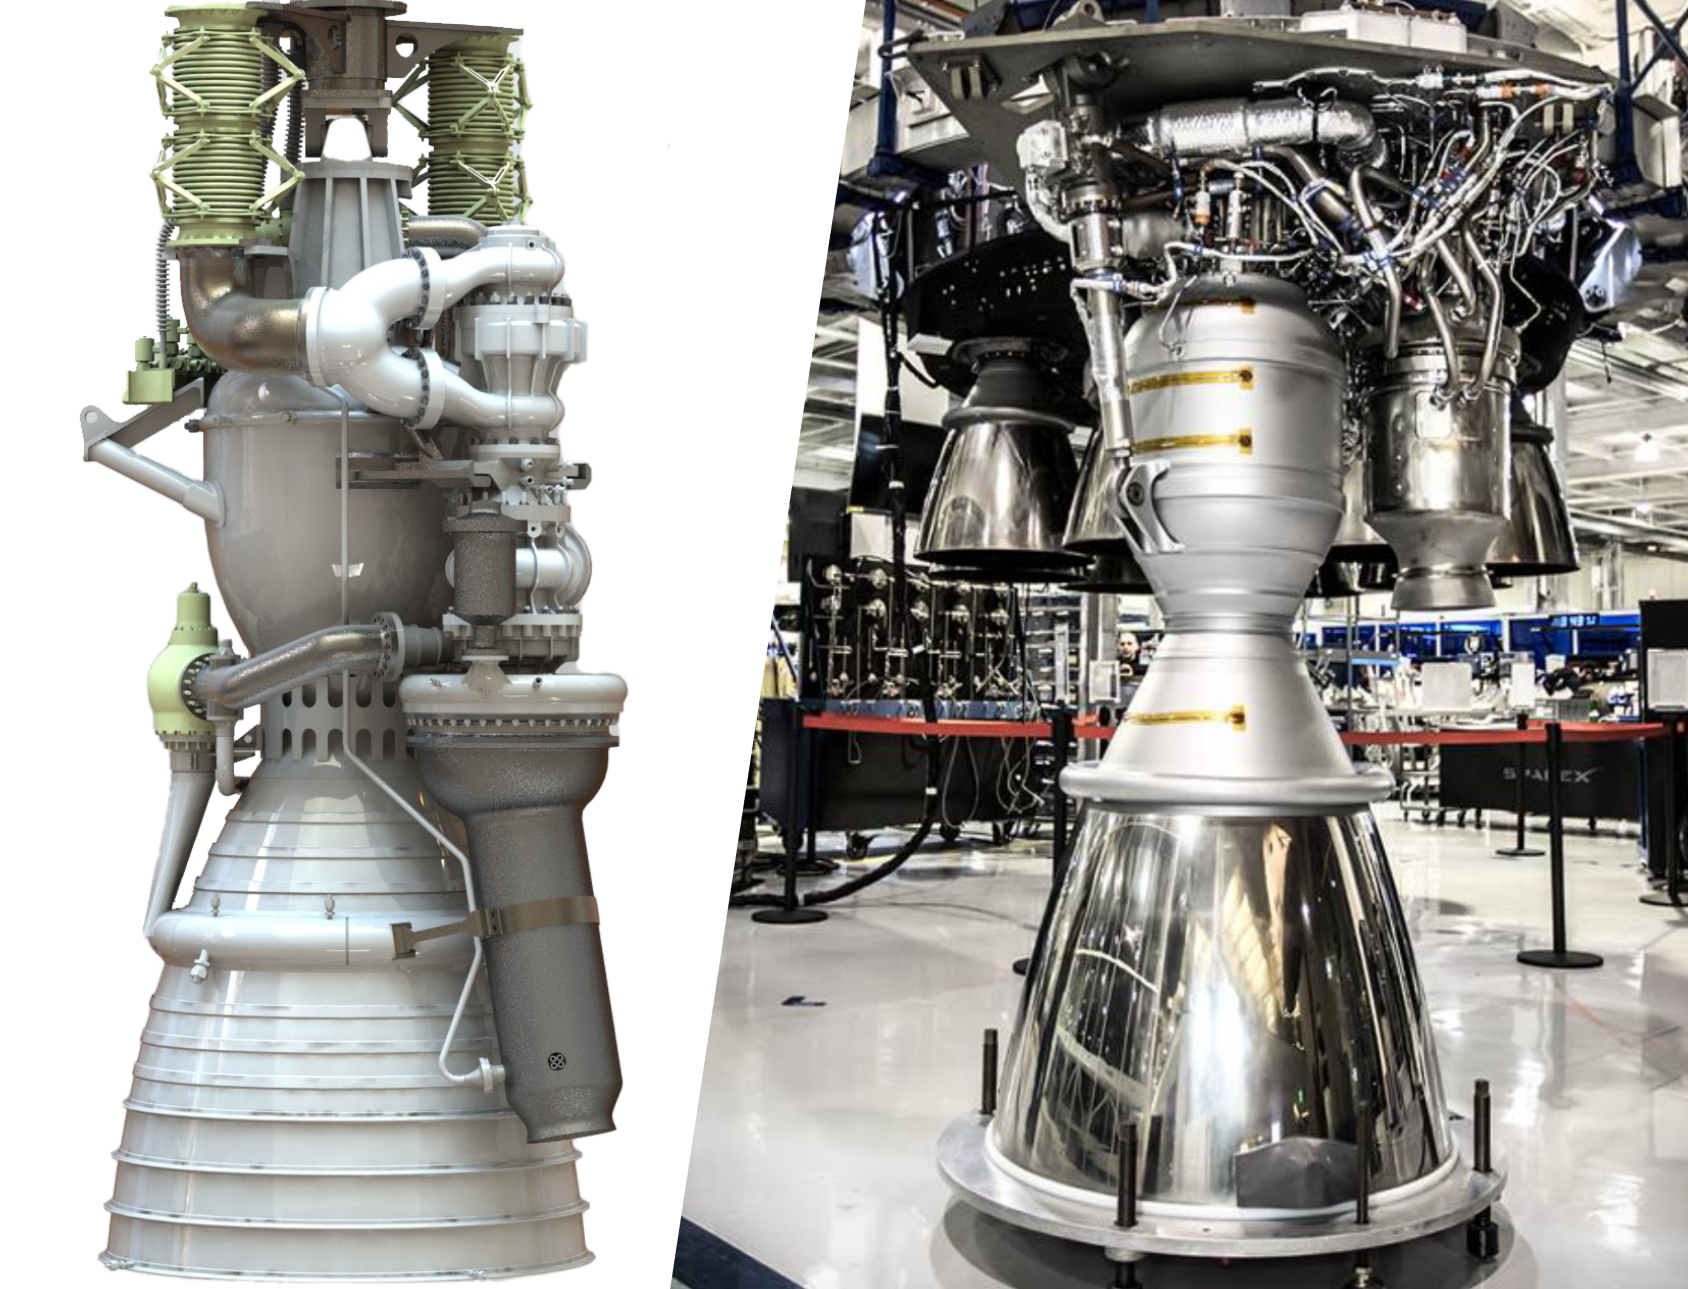 Galactic Energy's Welkin engine (left) and SpaceX's Merlin engine (right). (Not to scale)